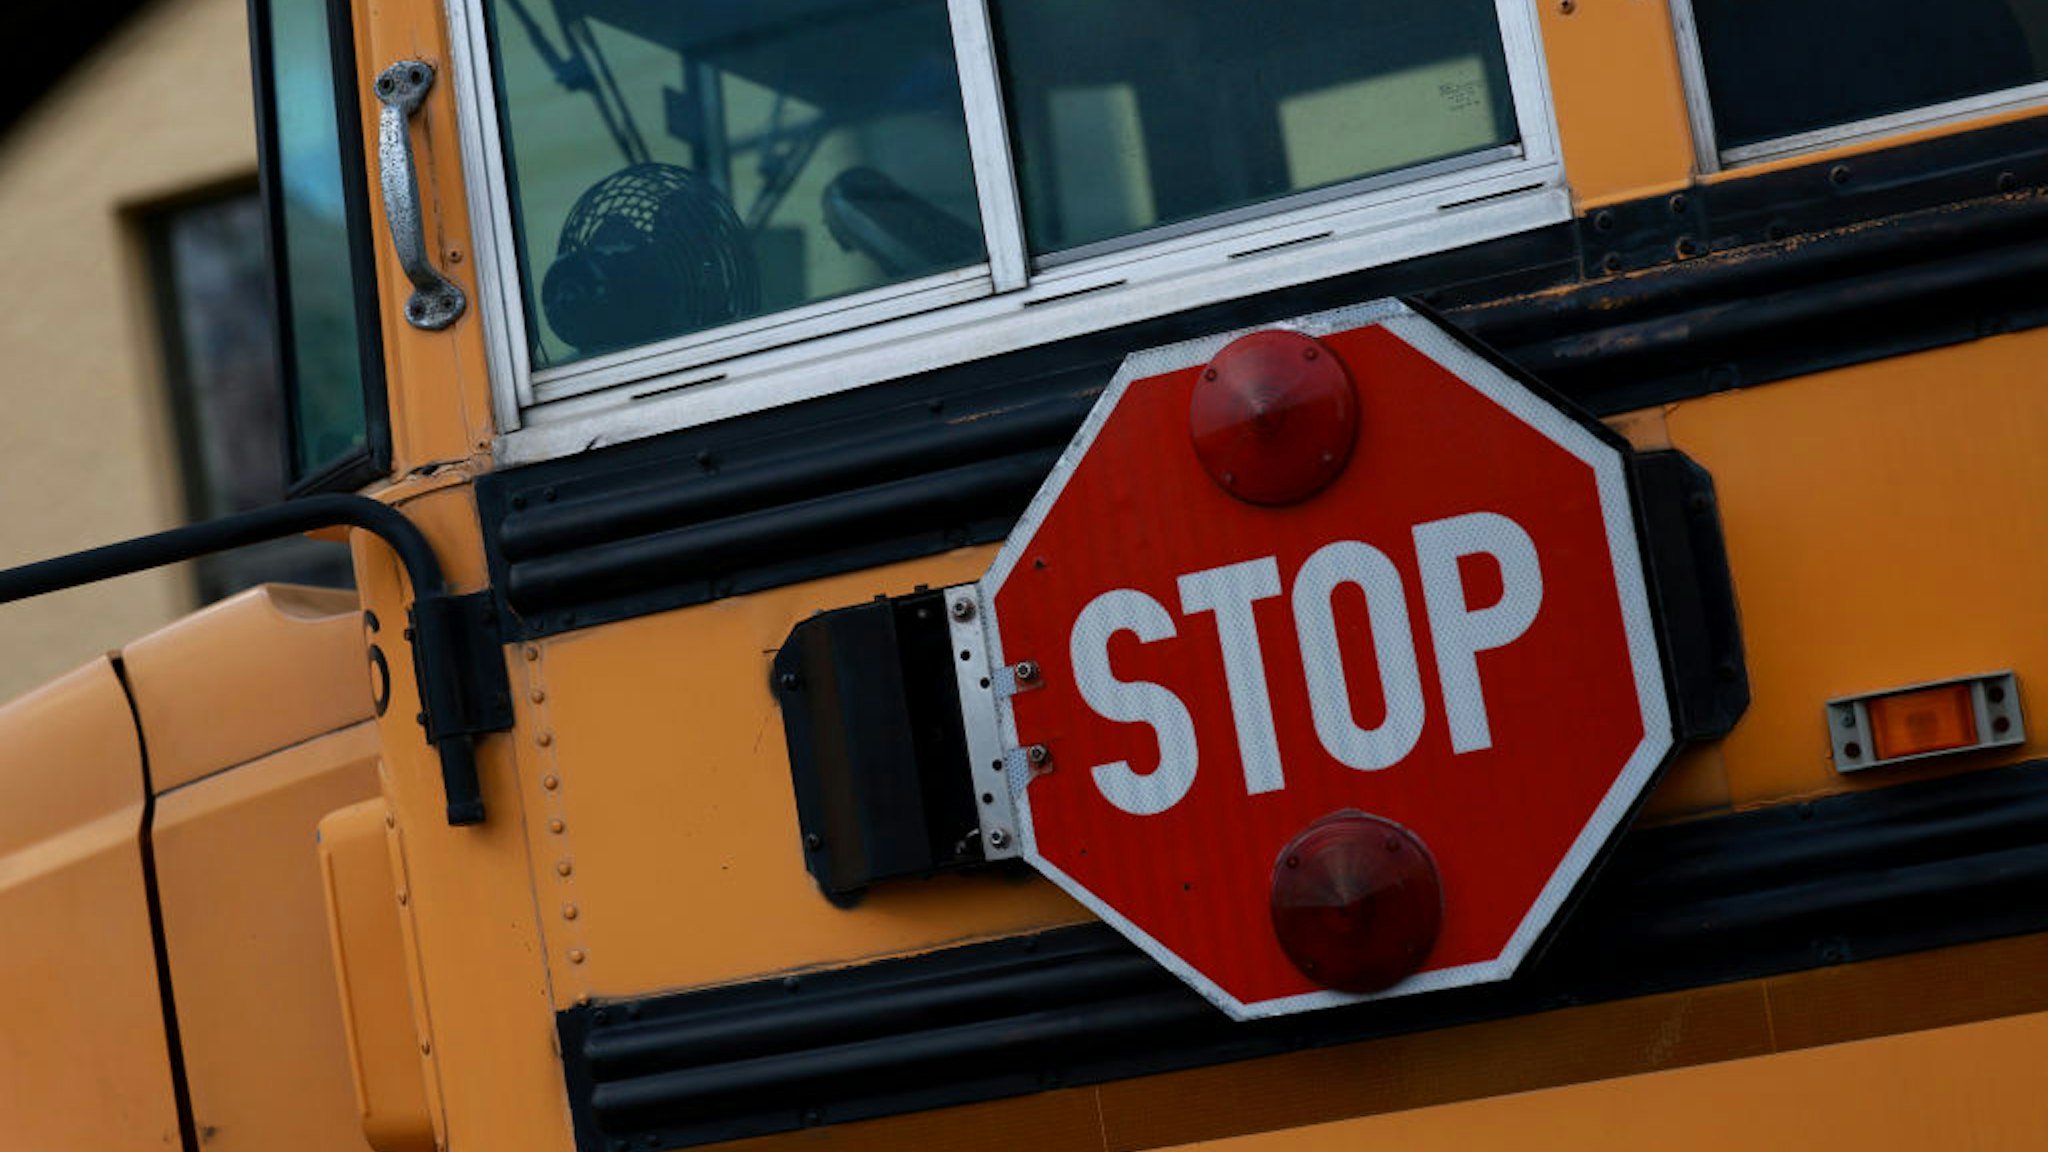 MIAMI, FLORIDA - APRIL 19: A stop sign attached to a school bus is shown on April 19, 2023 in Miami, Florida. The Florida Board of Education today approved banning discussion in the classroom of sexual orientation and gender identity for all grades through 12th grade, an expansion of what critics call the “Don’t Say Gay” law. (Photo by Joe Raedle/Getty Images)